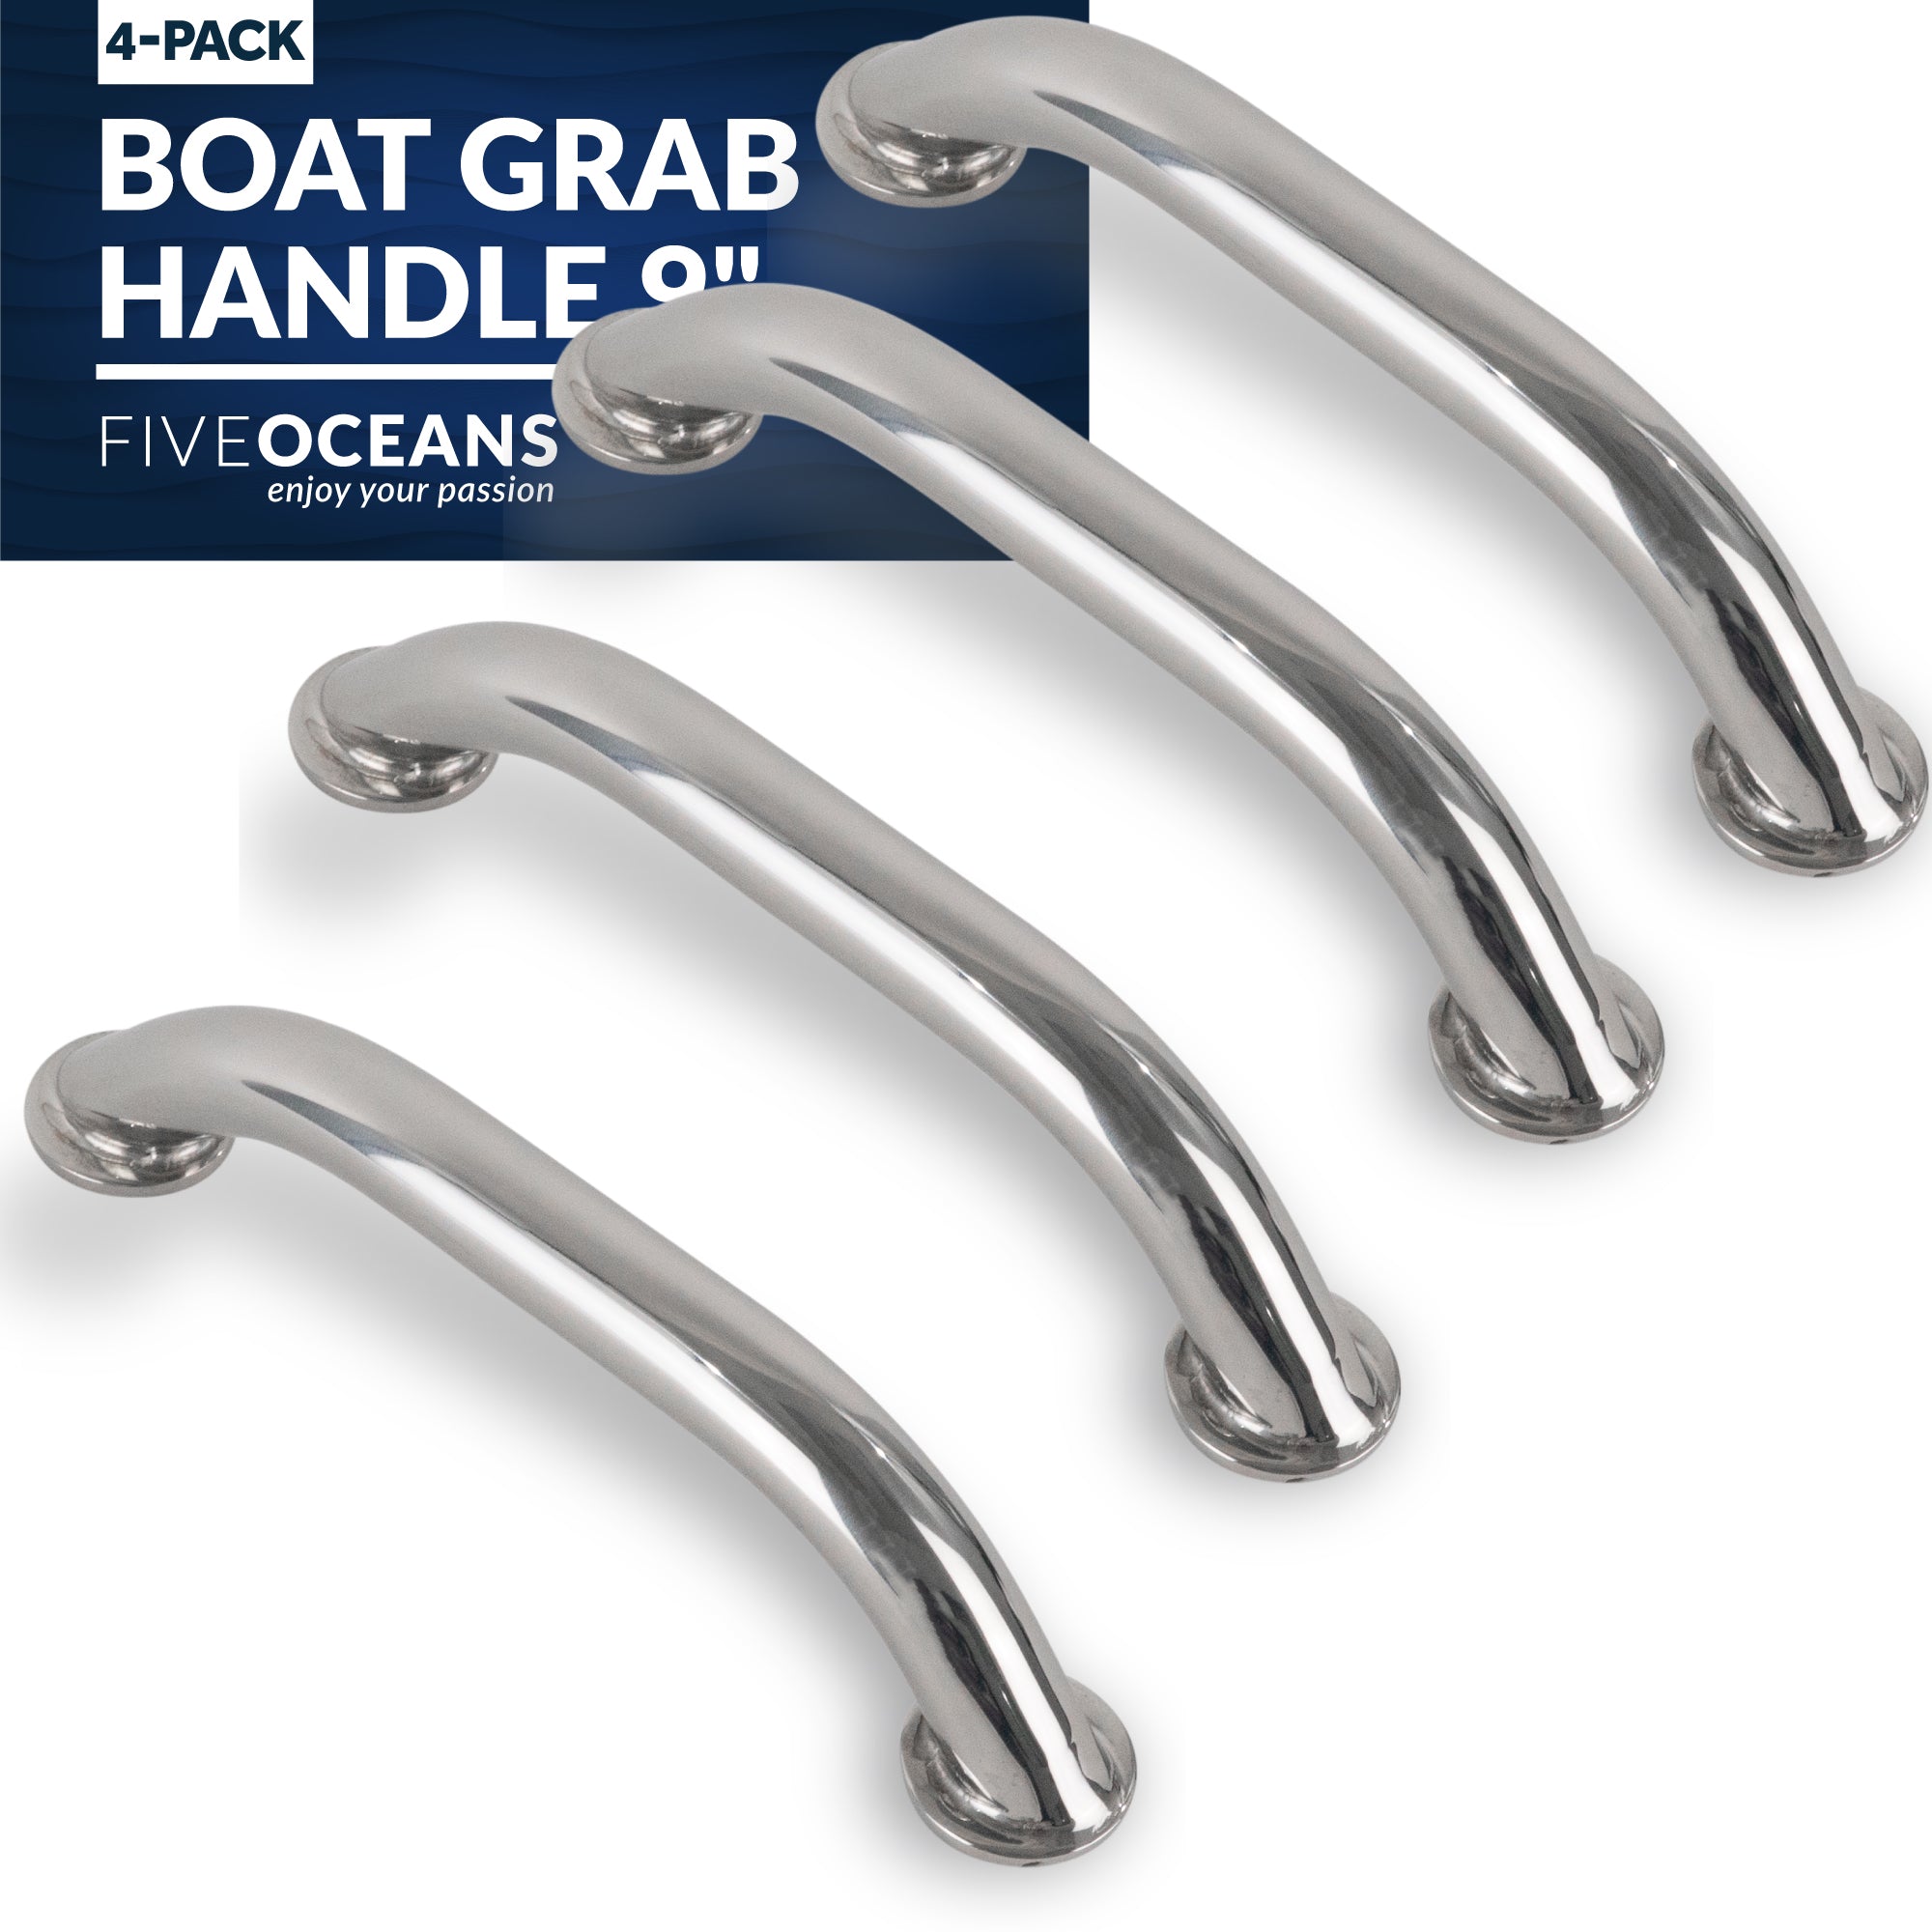 Boat Grab Handle, 9" Stainless Steel 2-Pack - FO577-M4